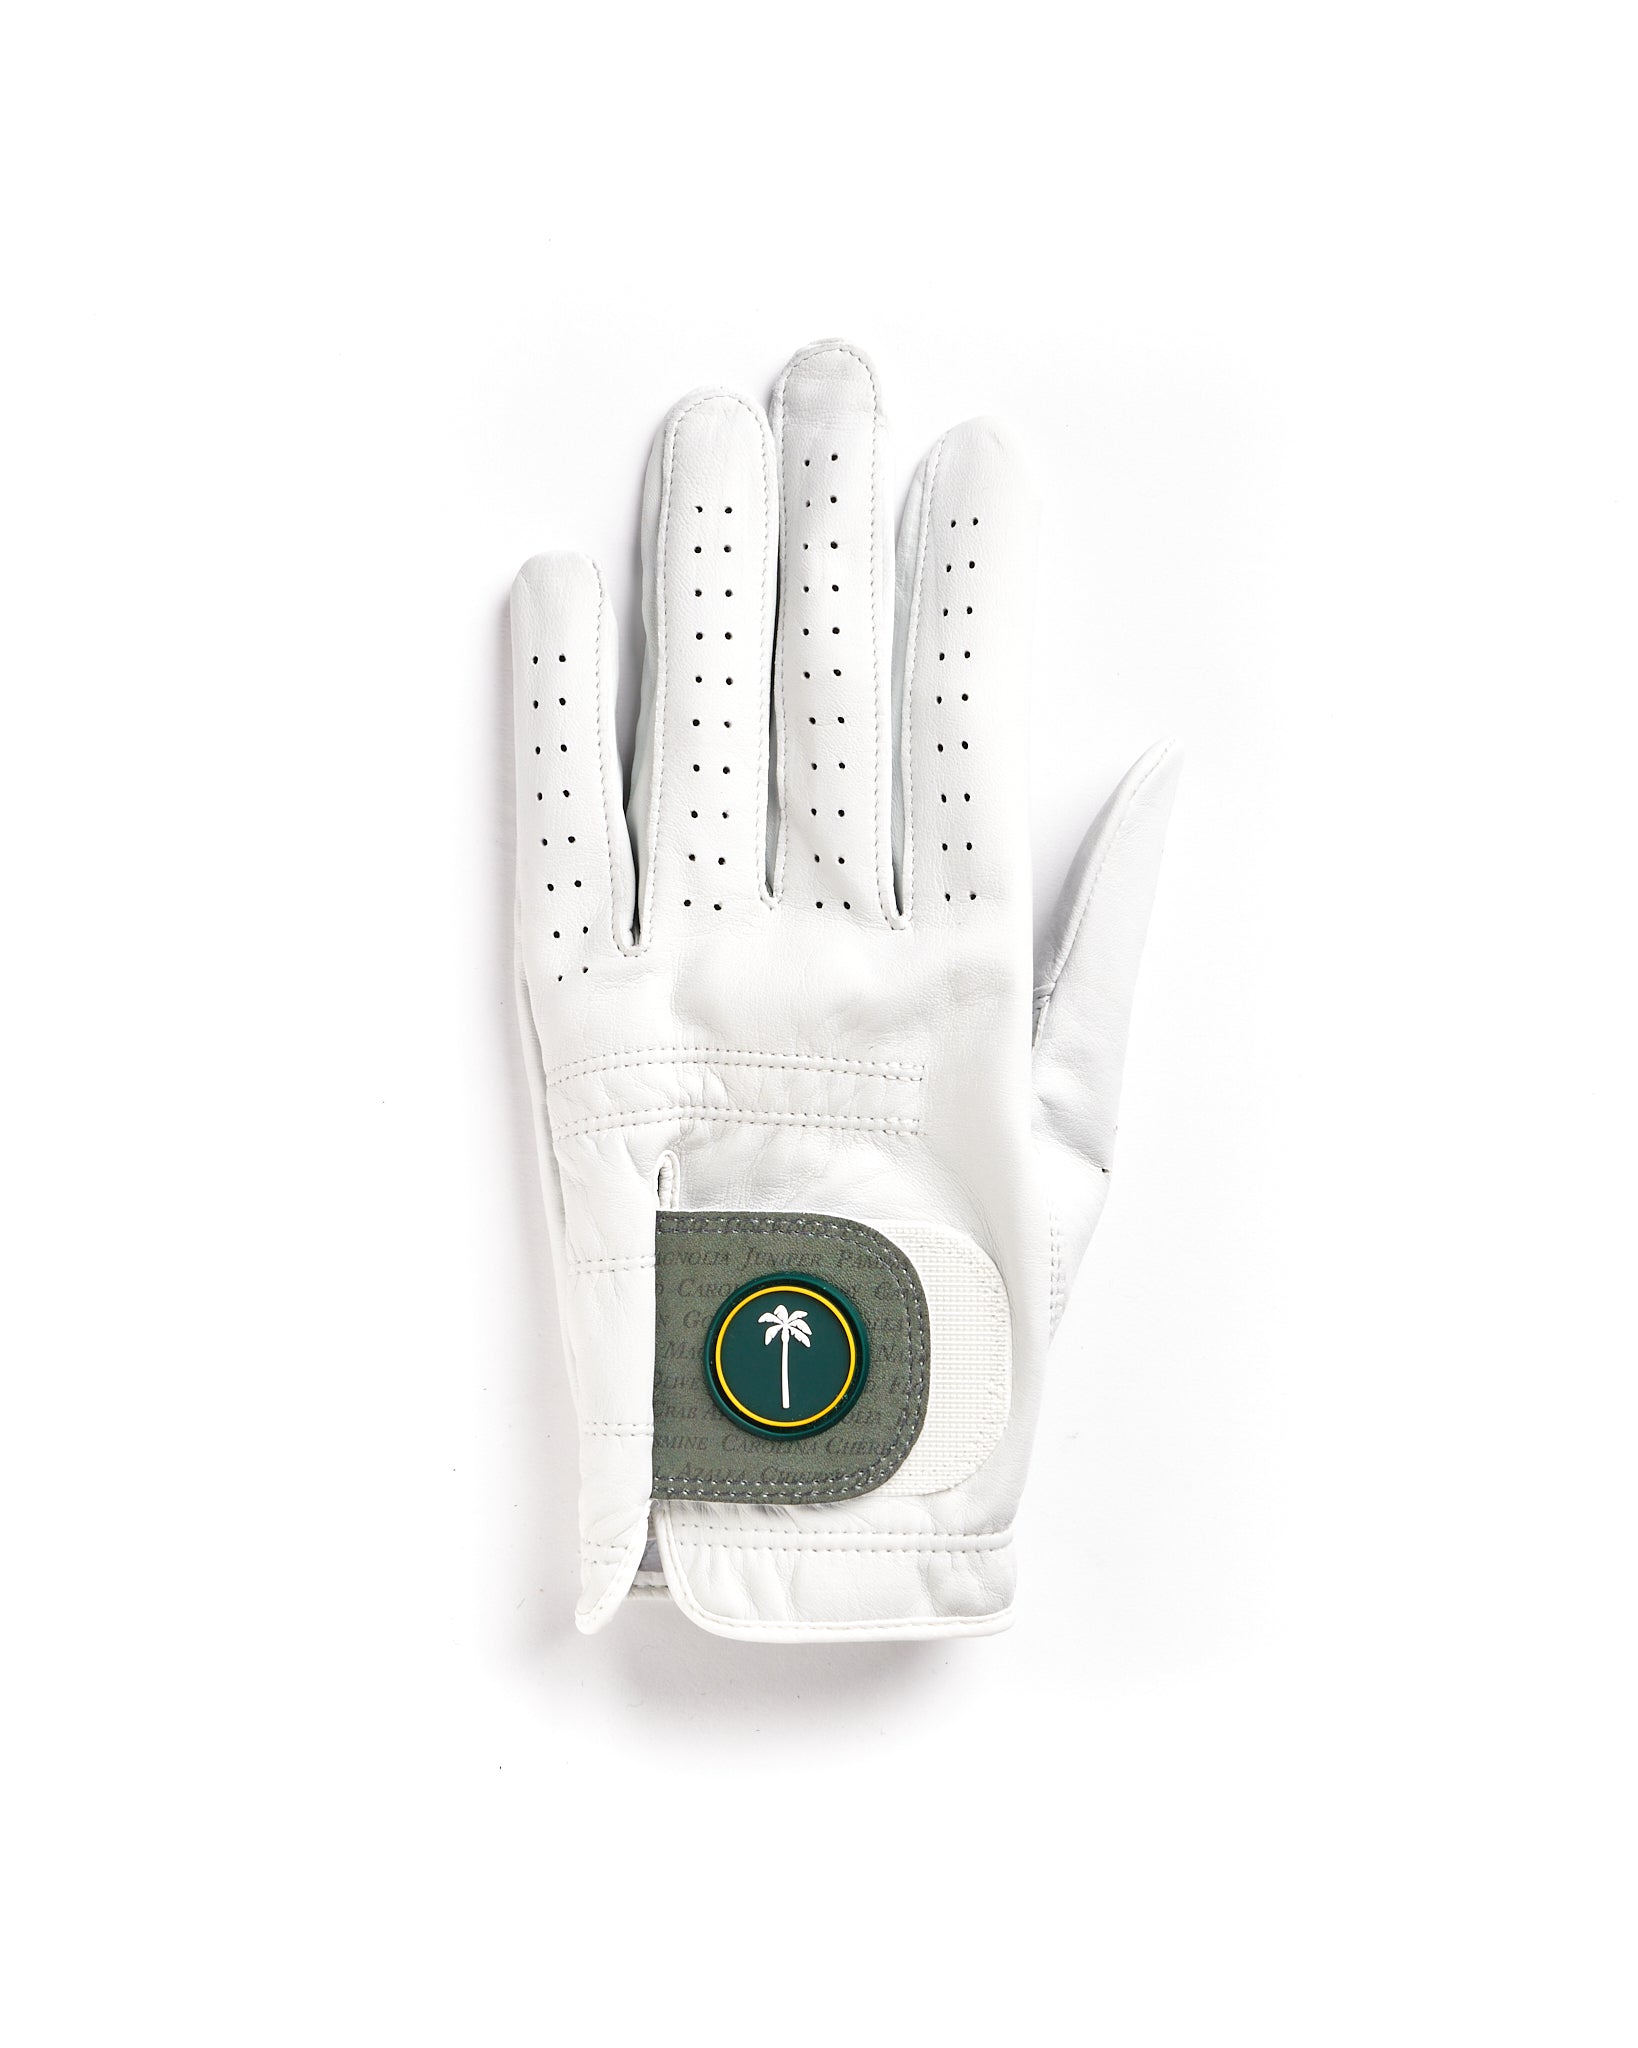 Palm Golf Co. Men's Tradition Glove